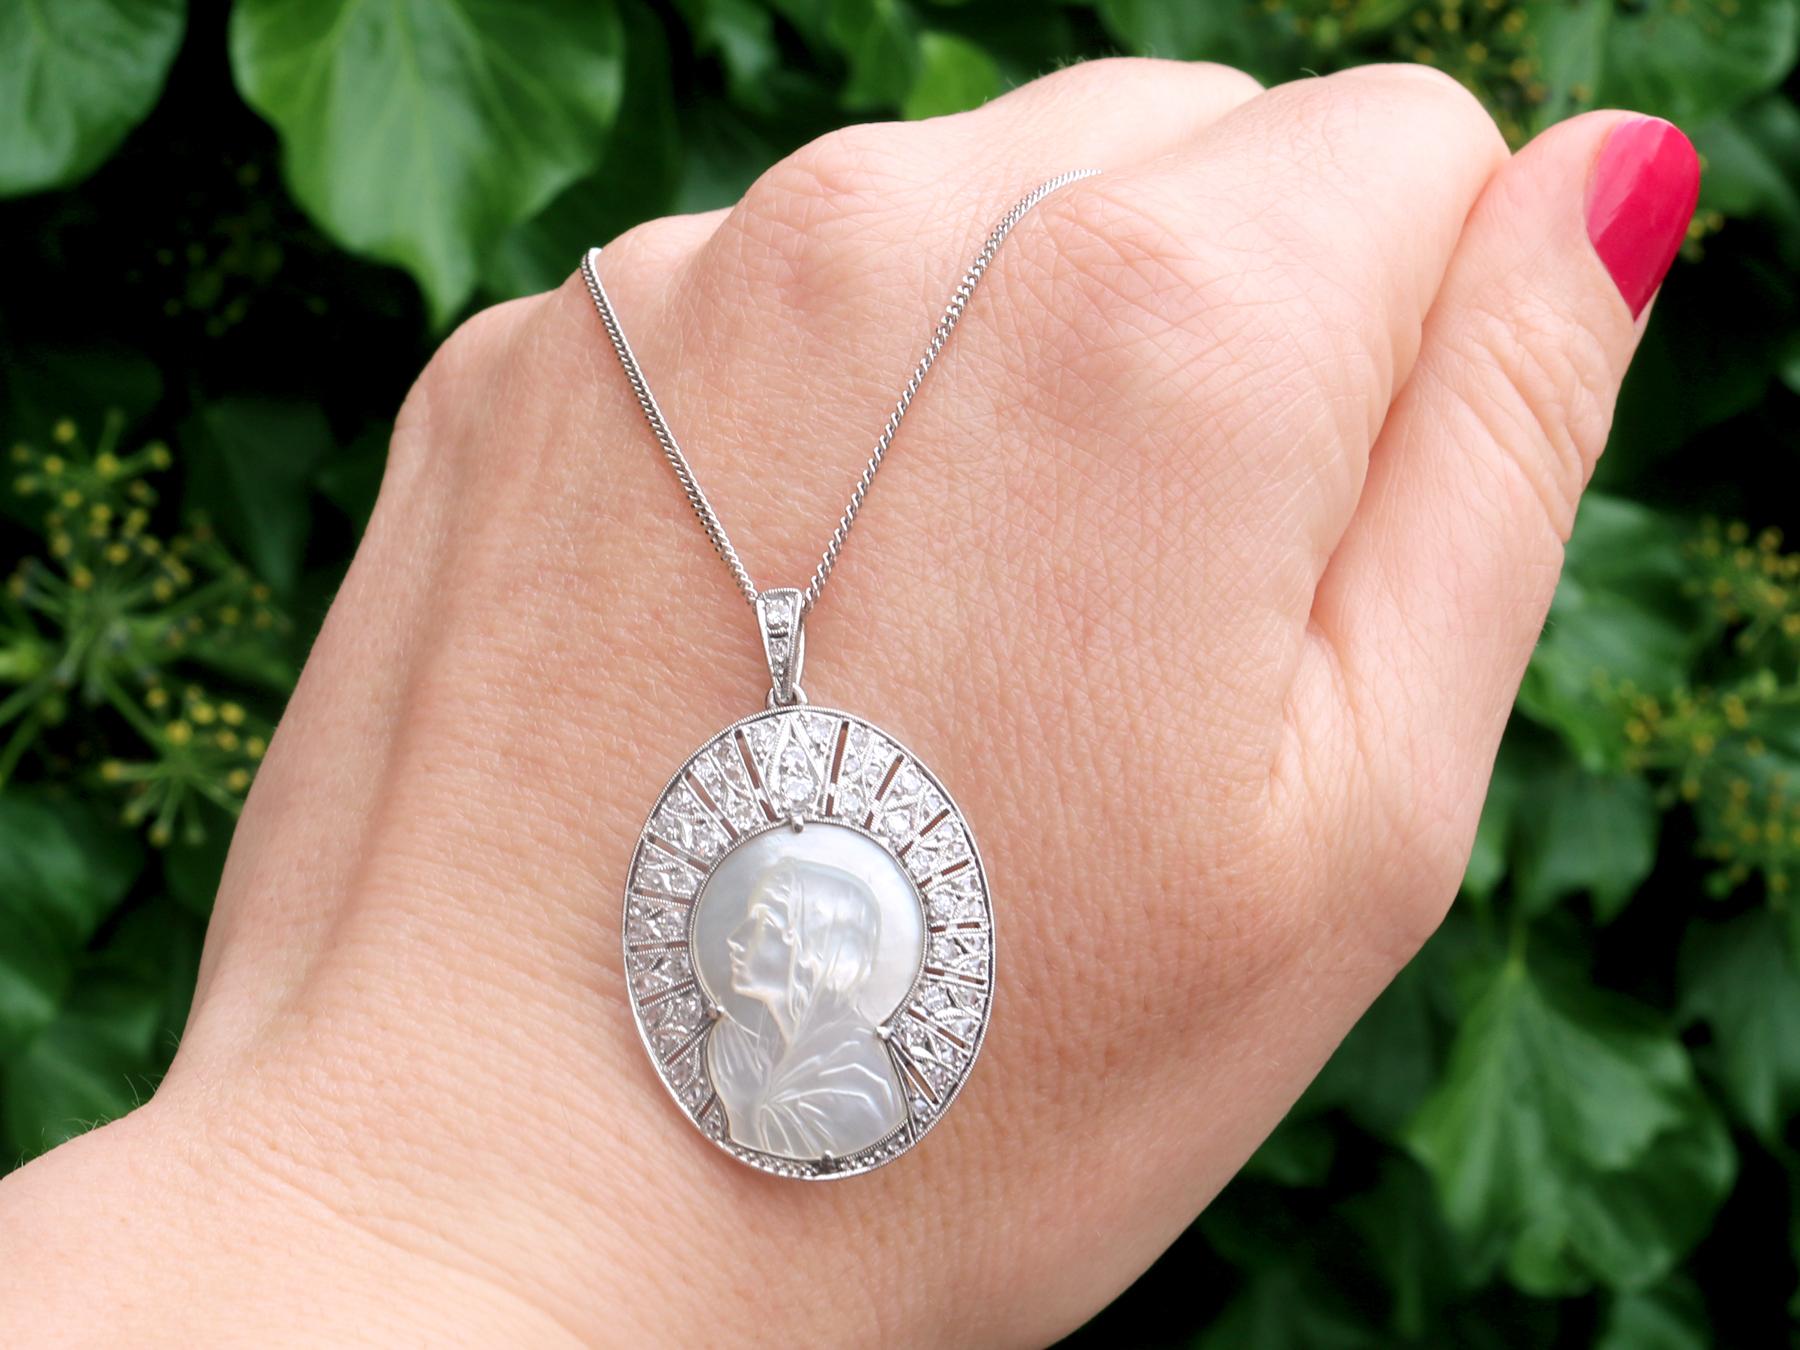 A stunning, fine and impressive antique 1920s mother of pearl and 0.45 carat diamond, platinum pendant; part of our diverse antique jewelry and estate jewelry collections.

This stunning, fine and impressive antique pendant has been crafted in